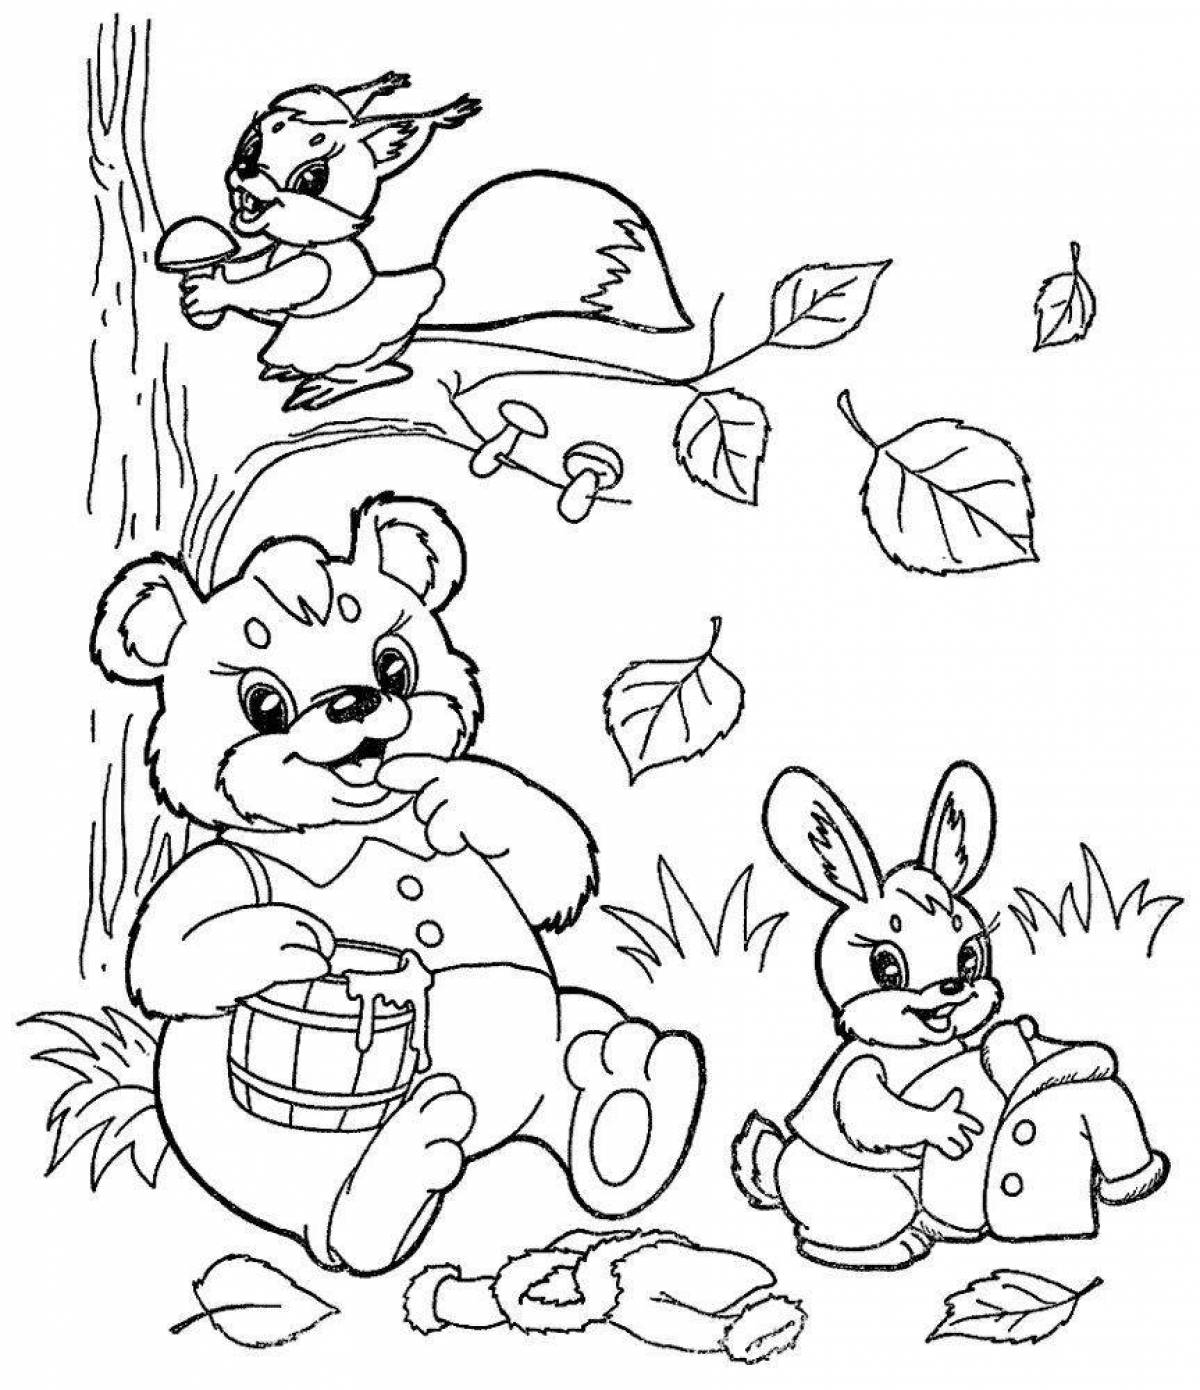 Gorgeous bear and hare coloring page